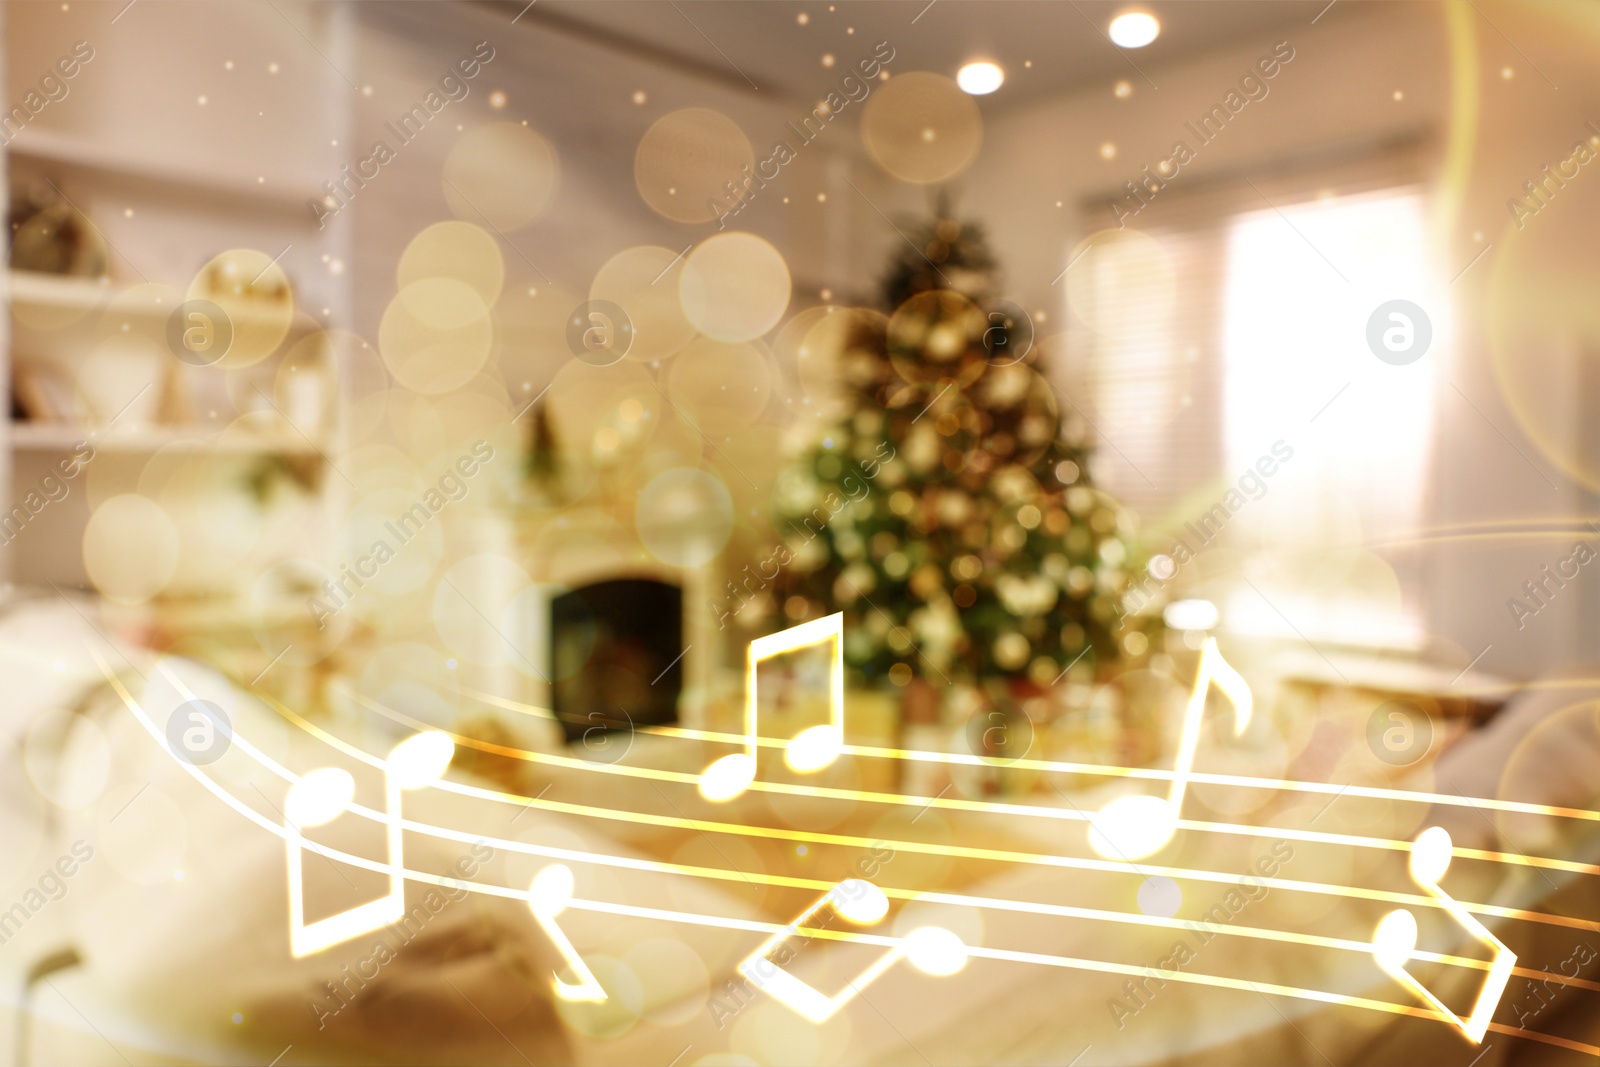 Image of Music notes and blurred view of room decorated for Christmas and New Year celebration, bokeh effect